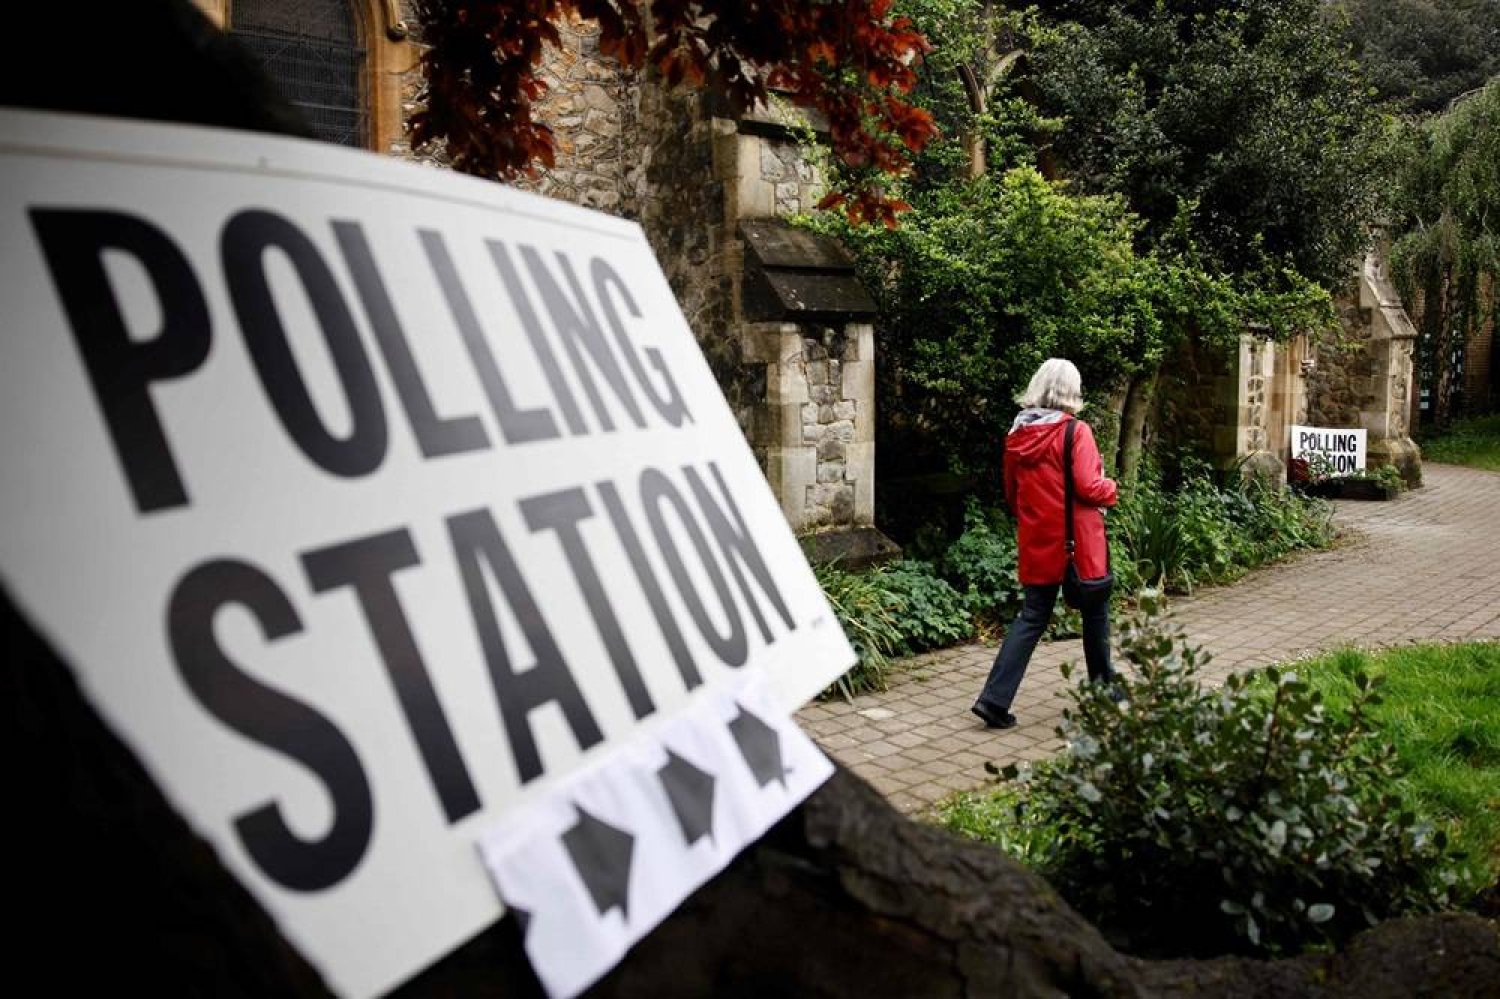 A voter arrives at a polling station located at Saint Savior Church in Chalk Farm, north London, to cast her vote in local elections, on May 2, 2024. (AFP)